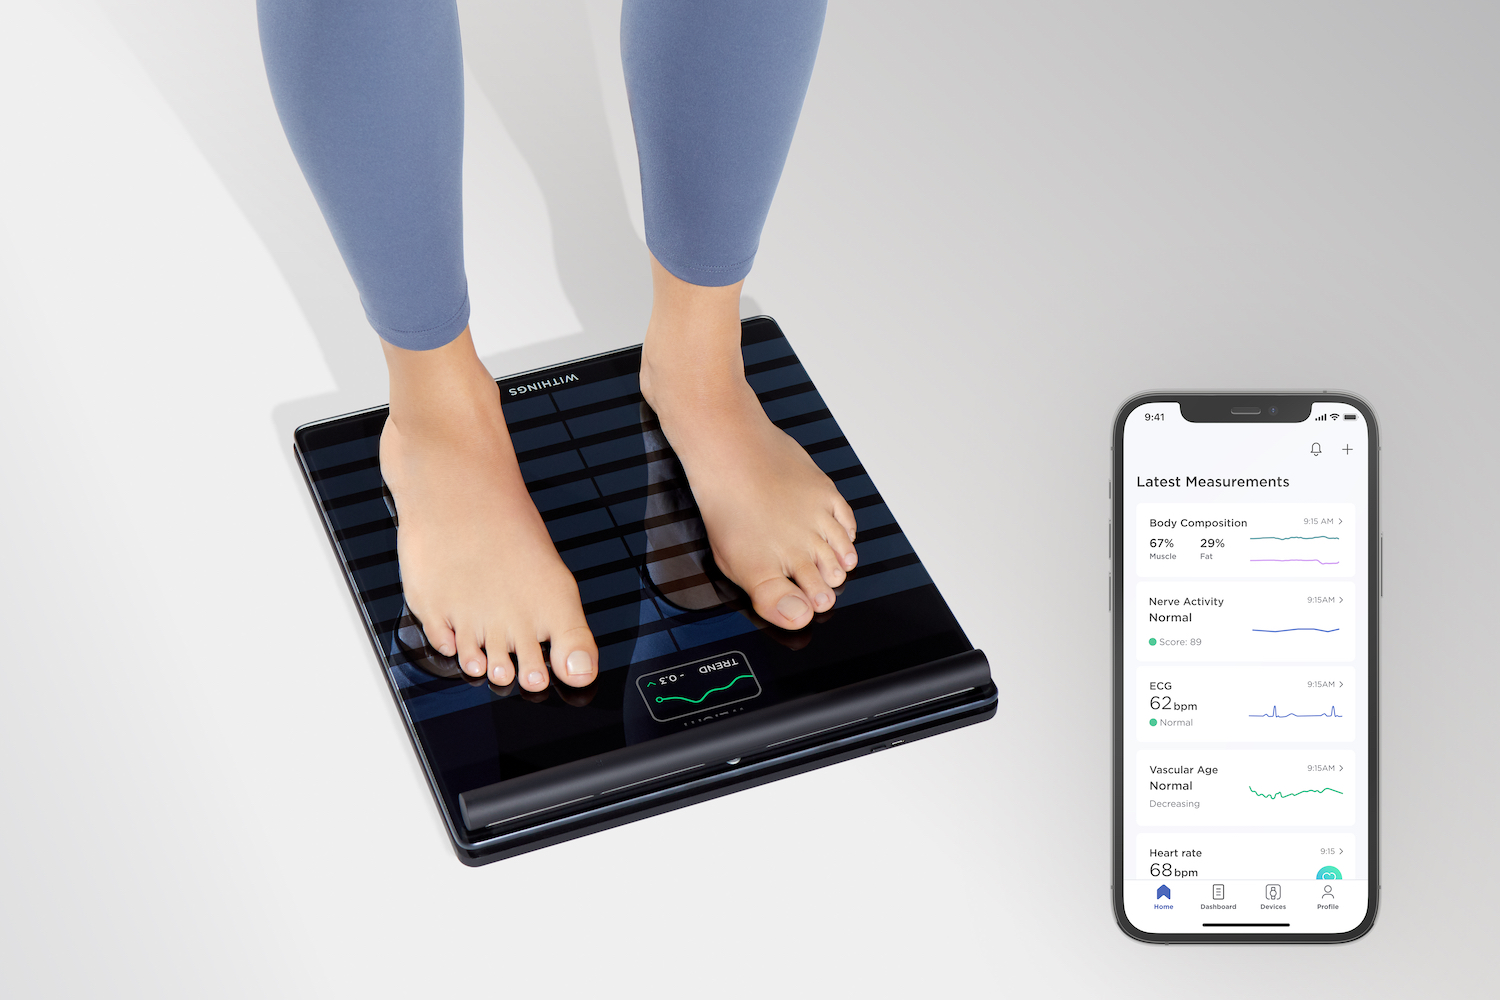 https://www.digitaltrends.com/wp-content/uploads/2022/01/withings-body-scan-feet.jpg?fit=1500%2C1000&p=1